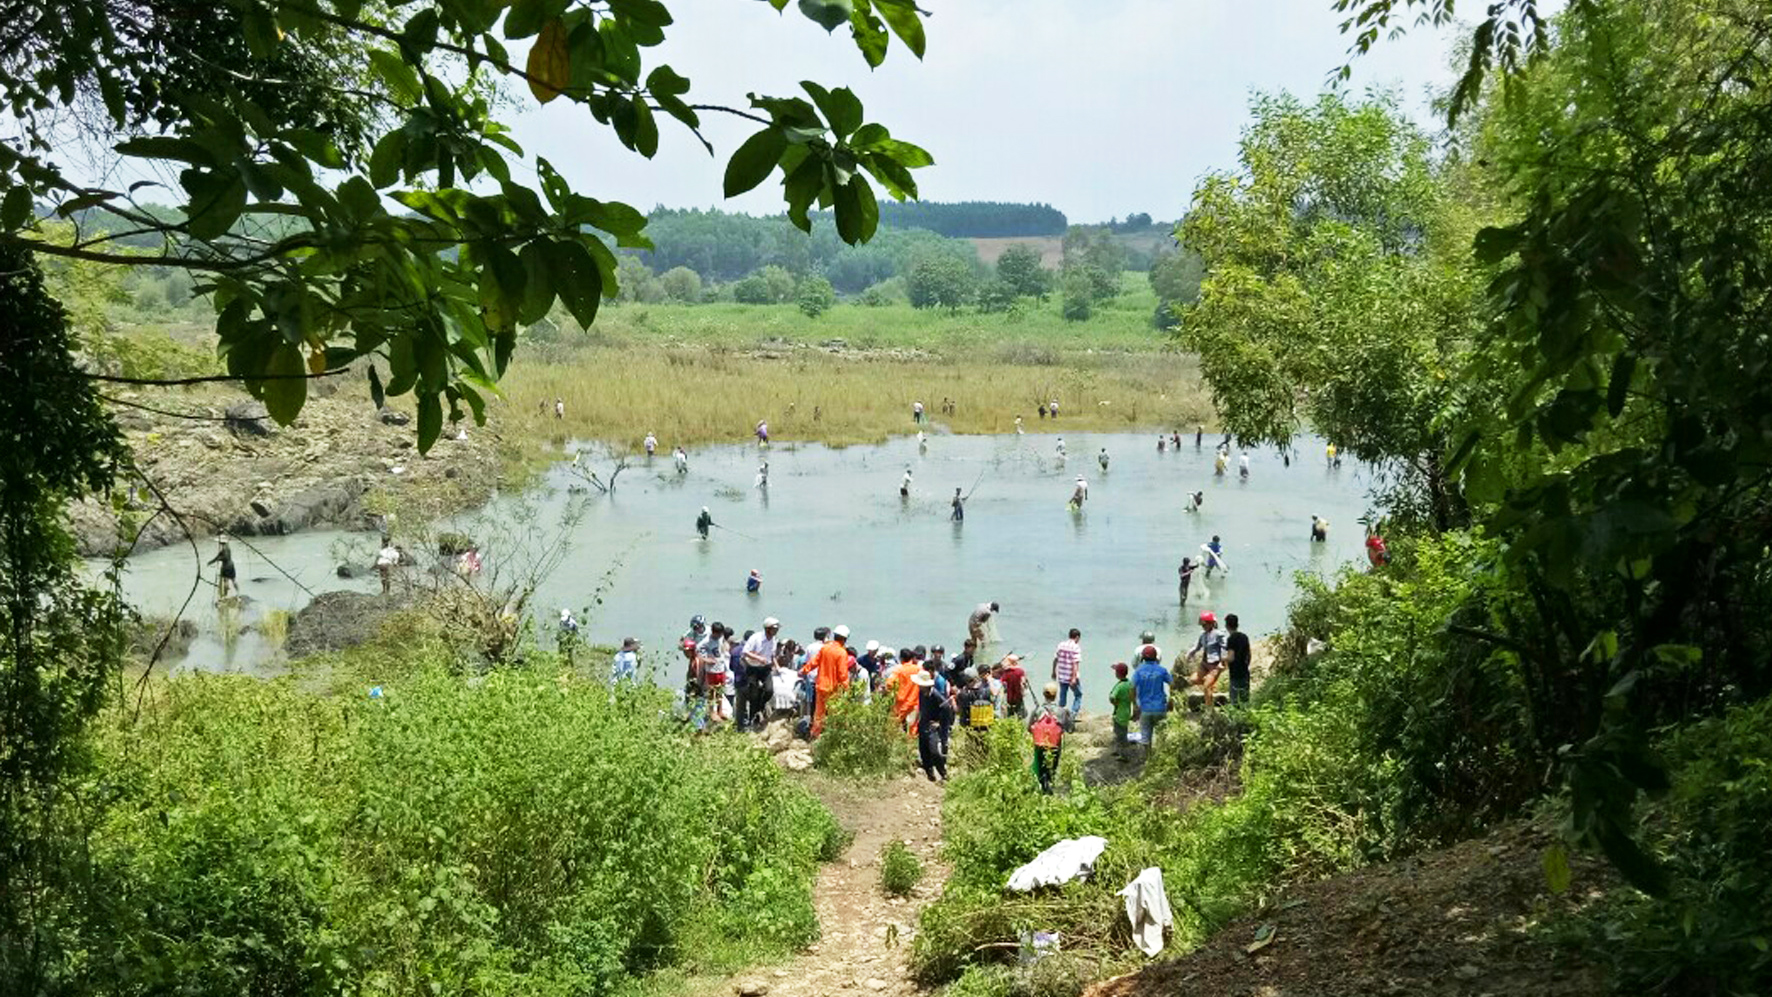 Residents from Vinh Cuu District and nearby localities in the southern province of Dong Nai gather at the location to harvest the fish.